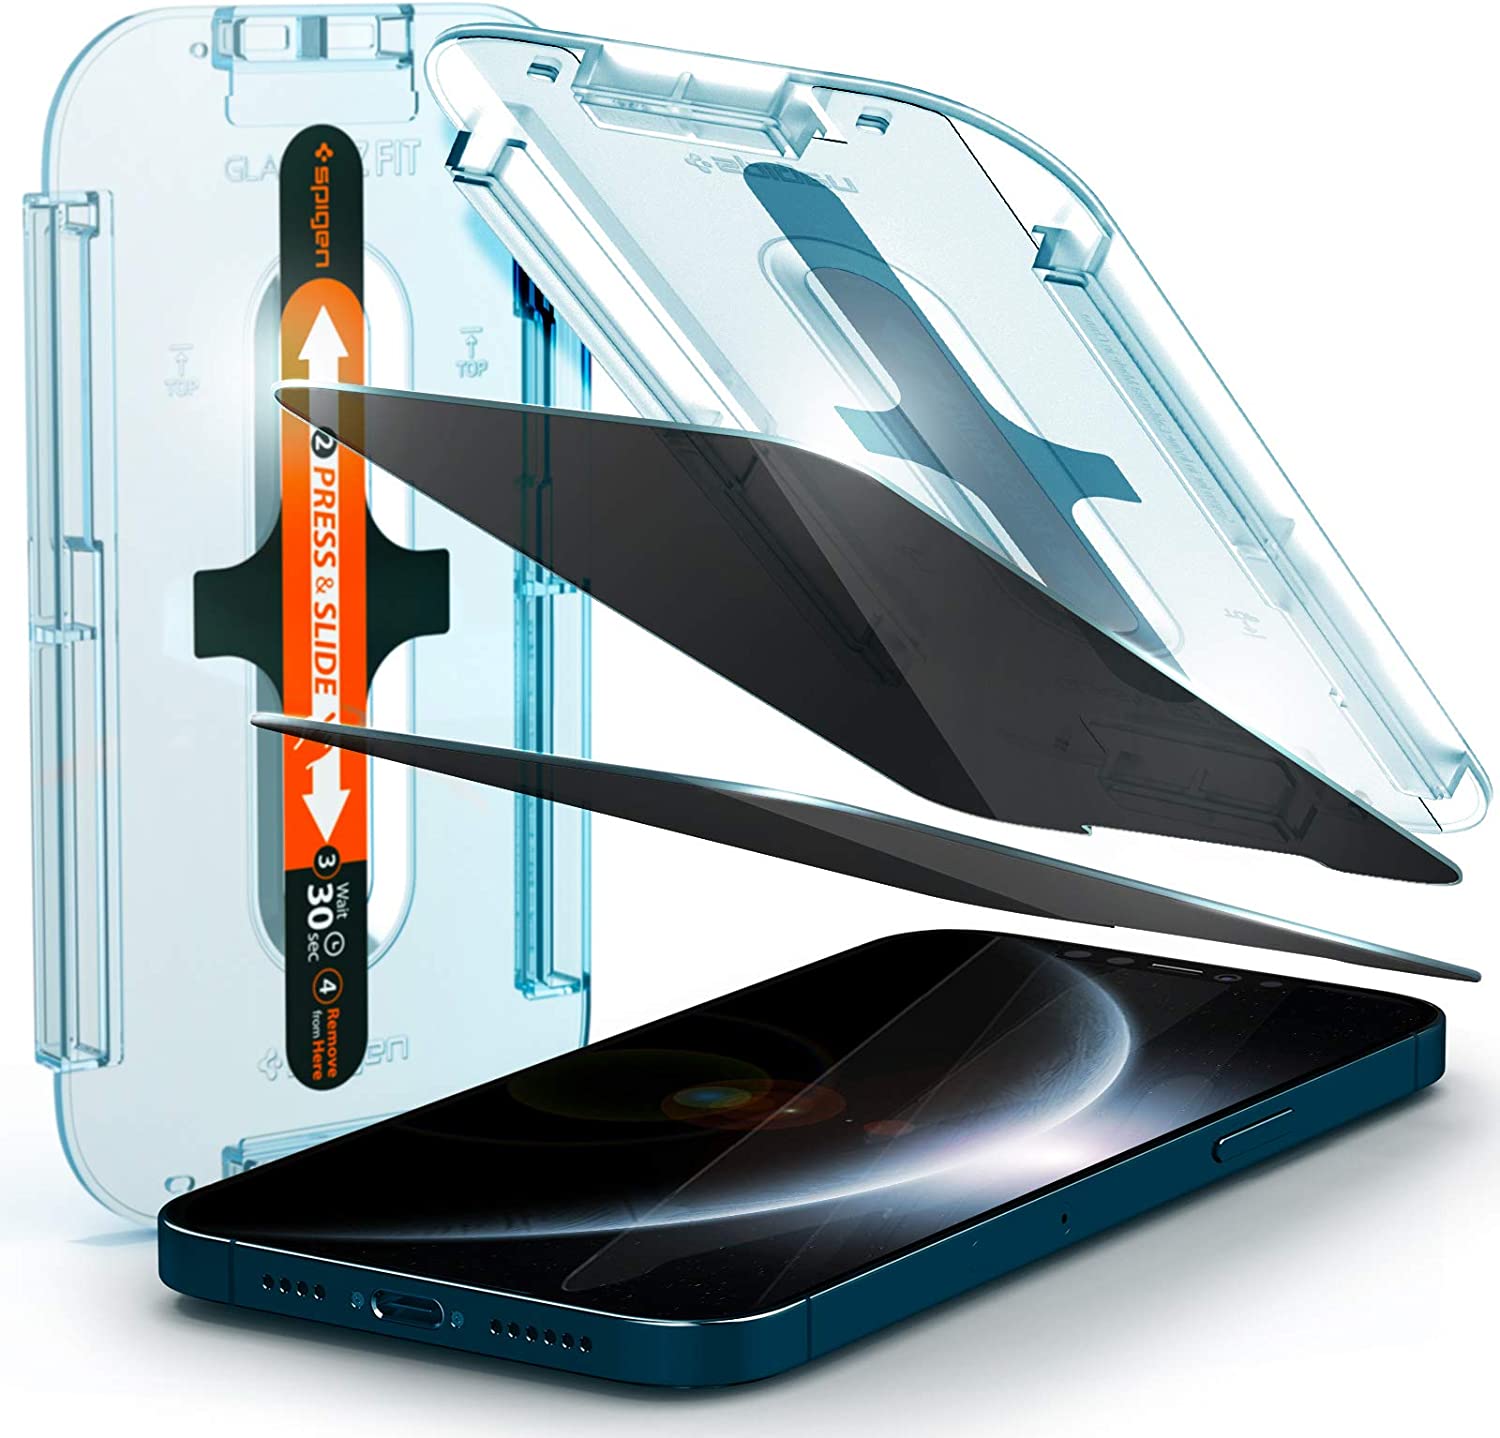 Spigen Tempered Glass Screen Protector [Glas.tR EZ Fit - Privacy] Designed for iPhone 11 Pro Max / XS Max - 2 Pack.. (NC)